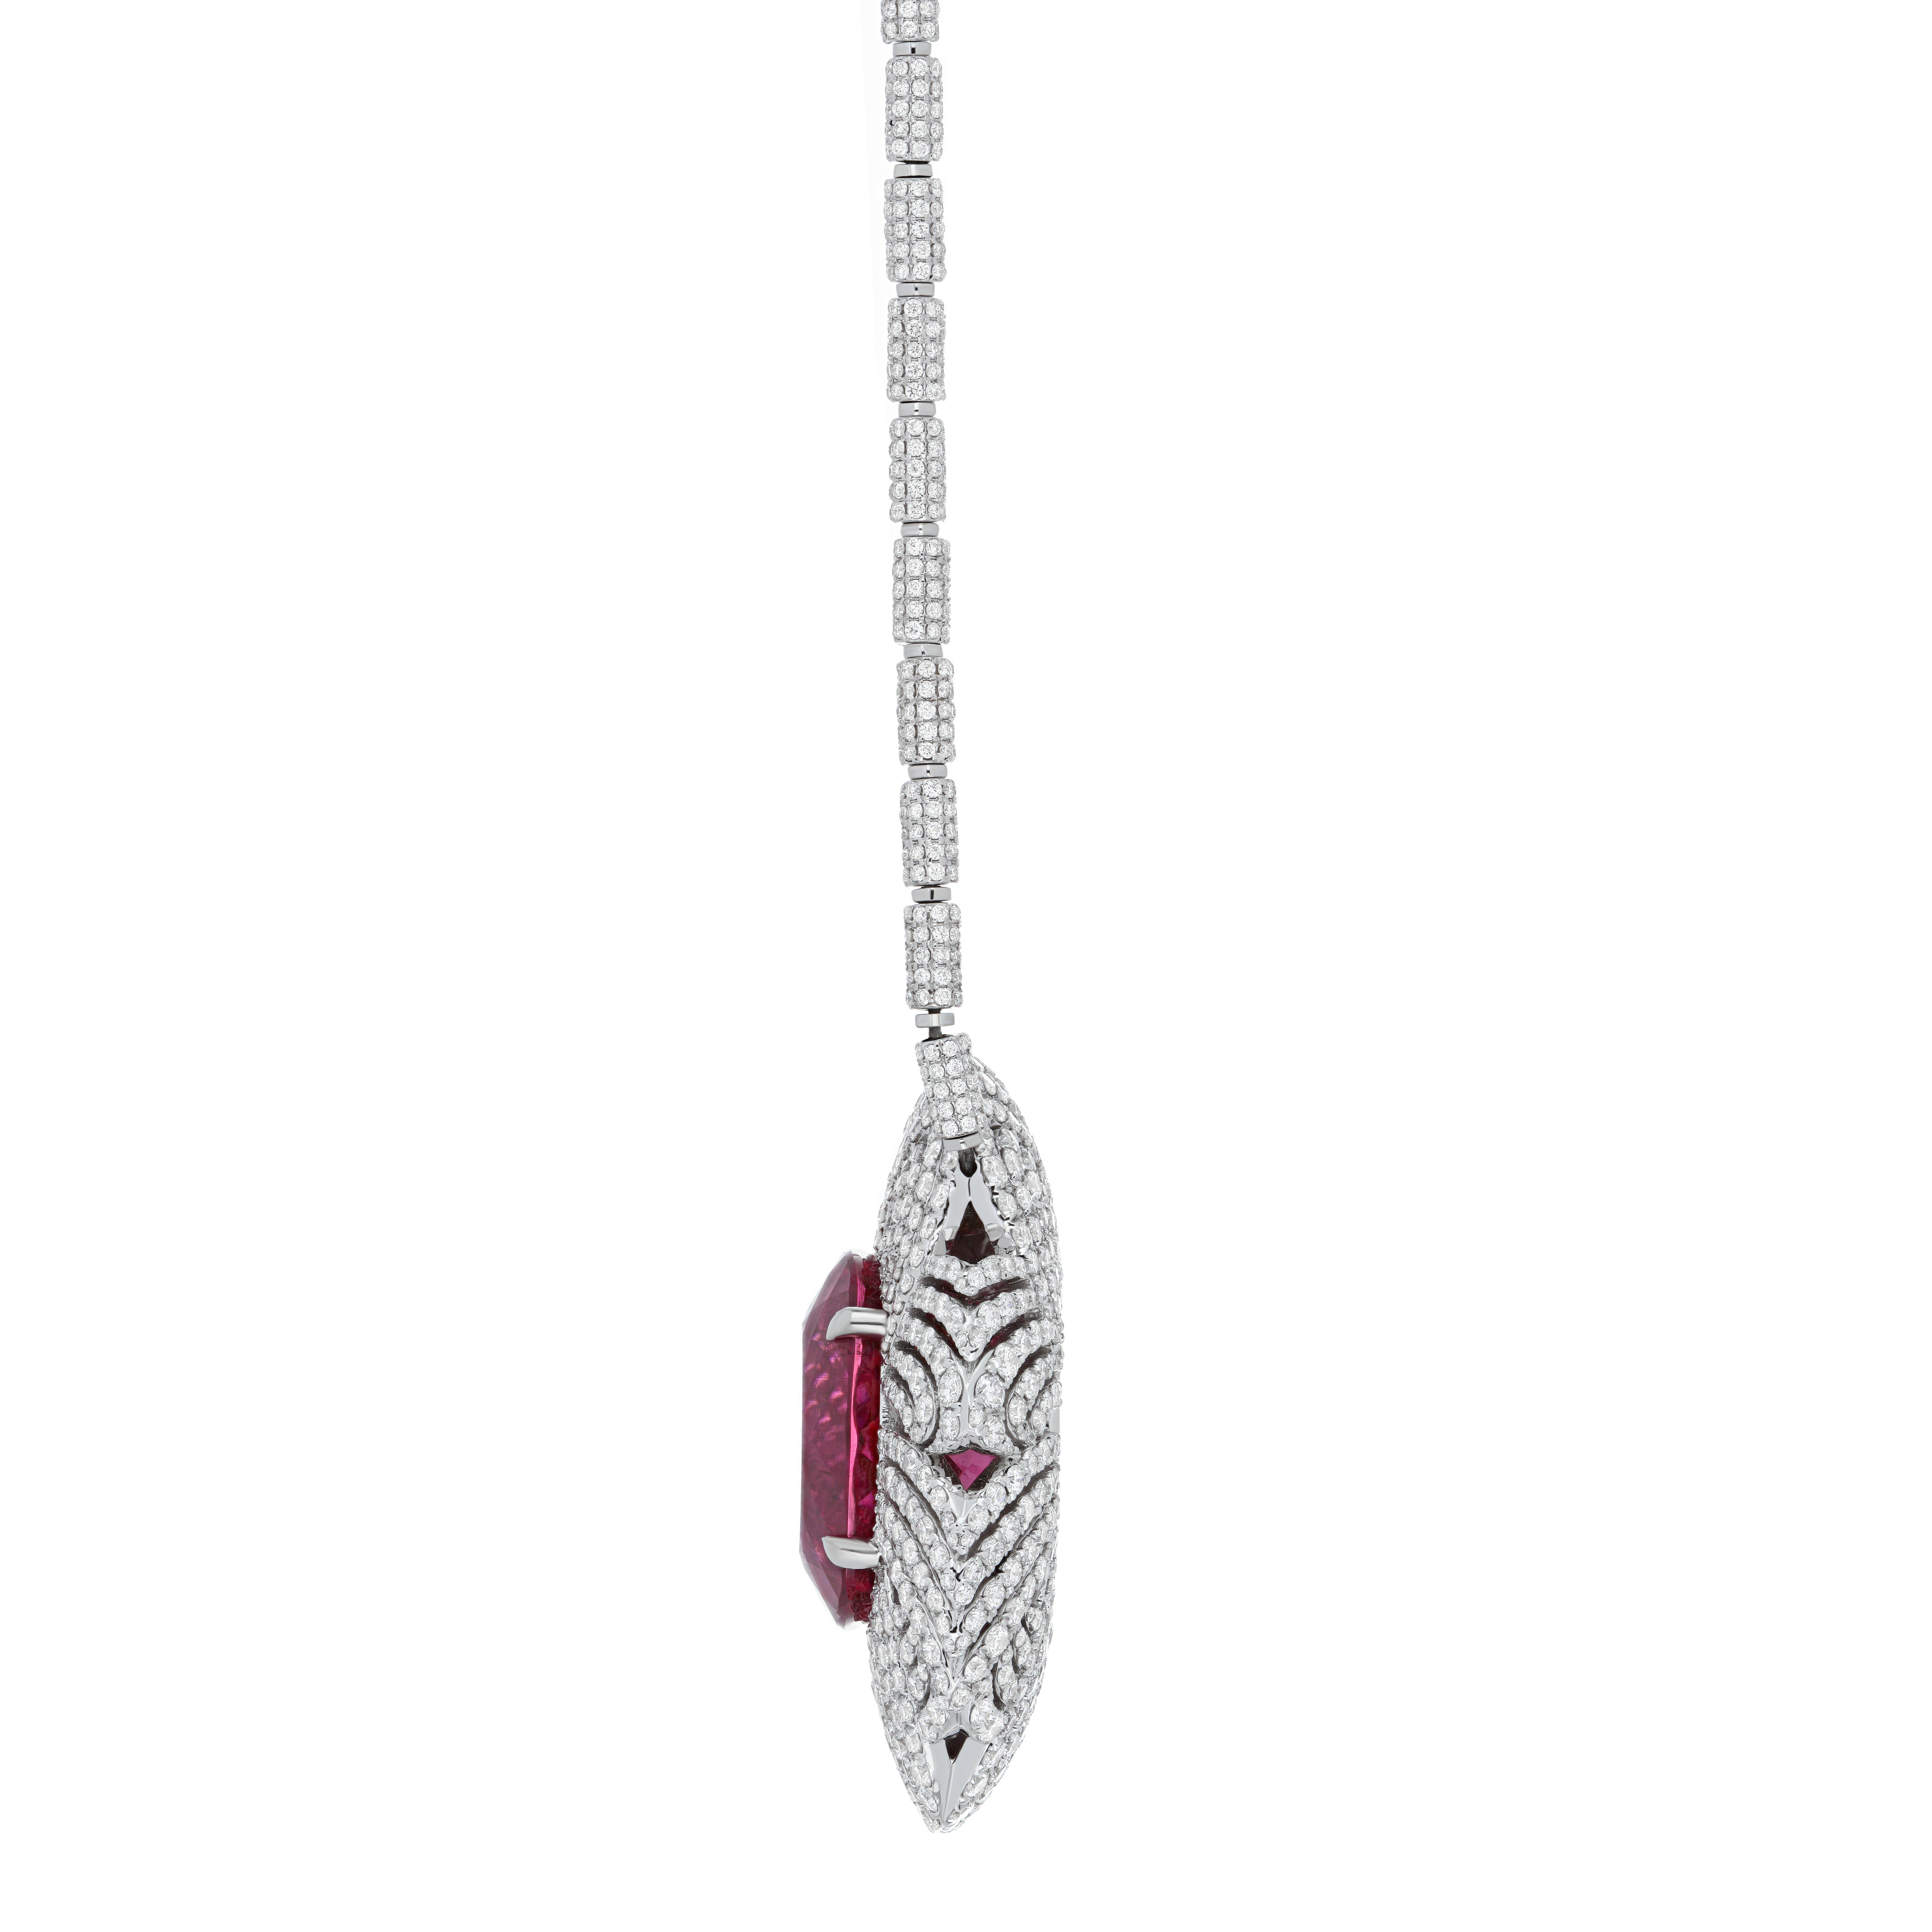 Oval Cut One of a Kind 22 Carat Rubellite and Diamond Necklace in 18K White Gold For Sale